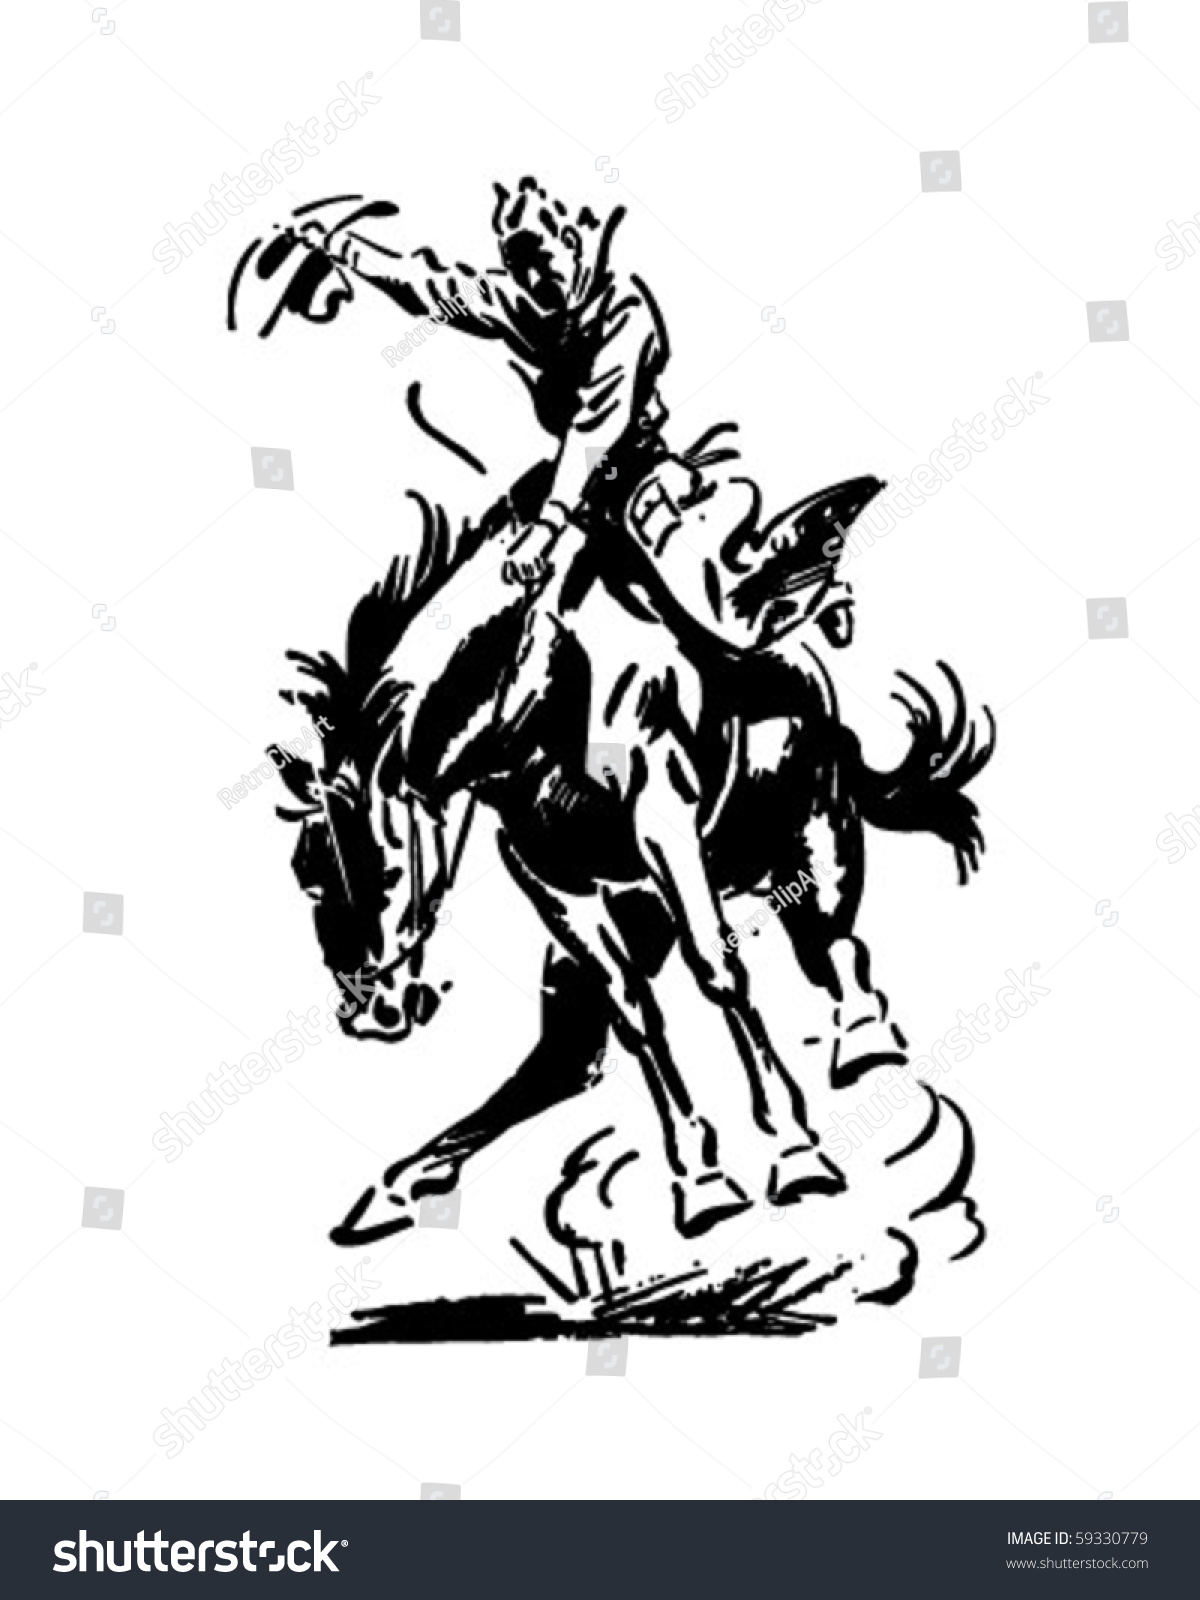 vintage rodeo clipart - photo #15